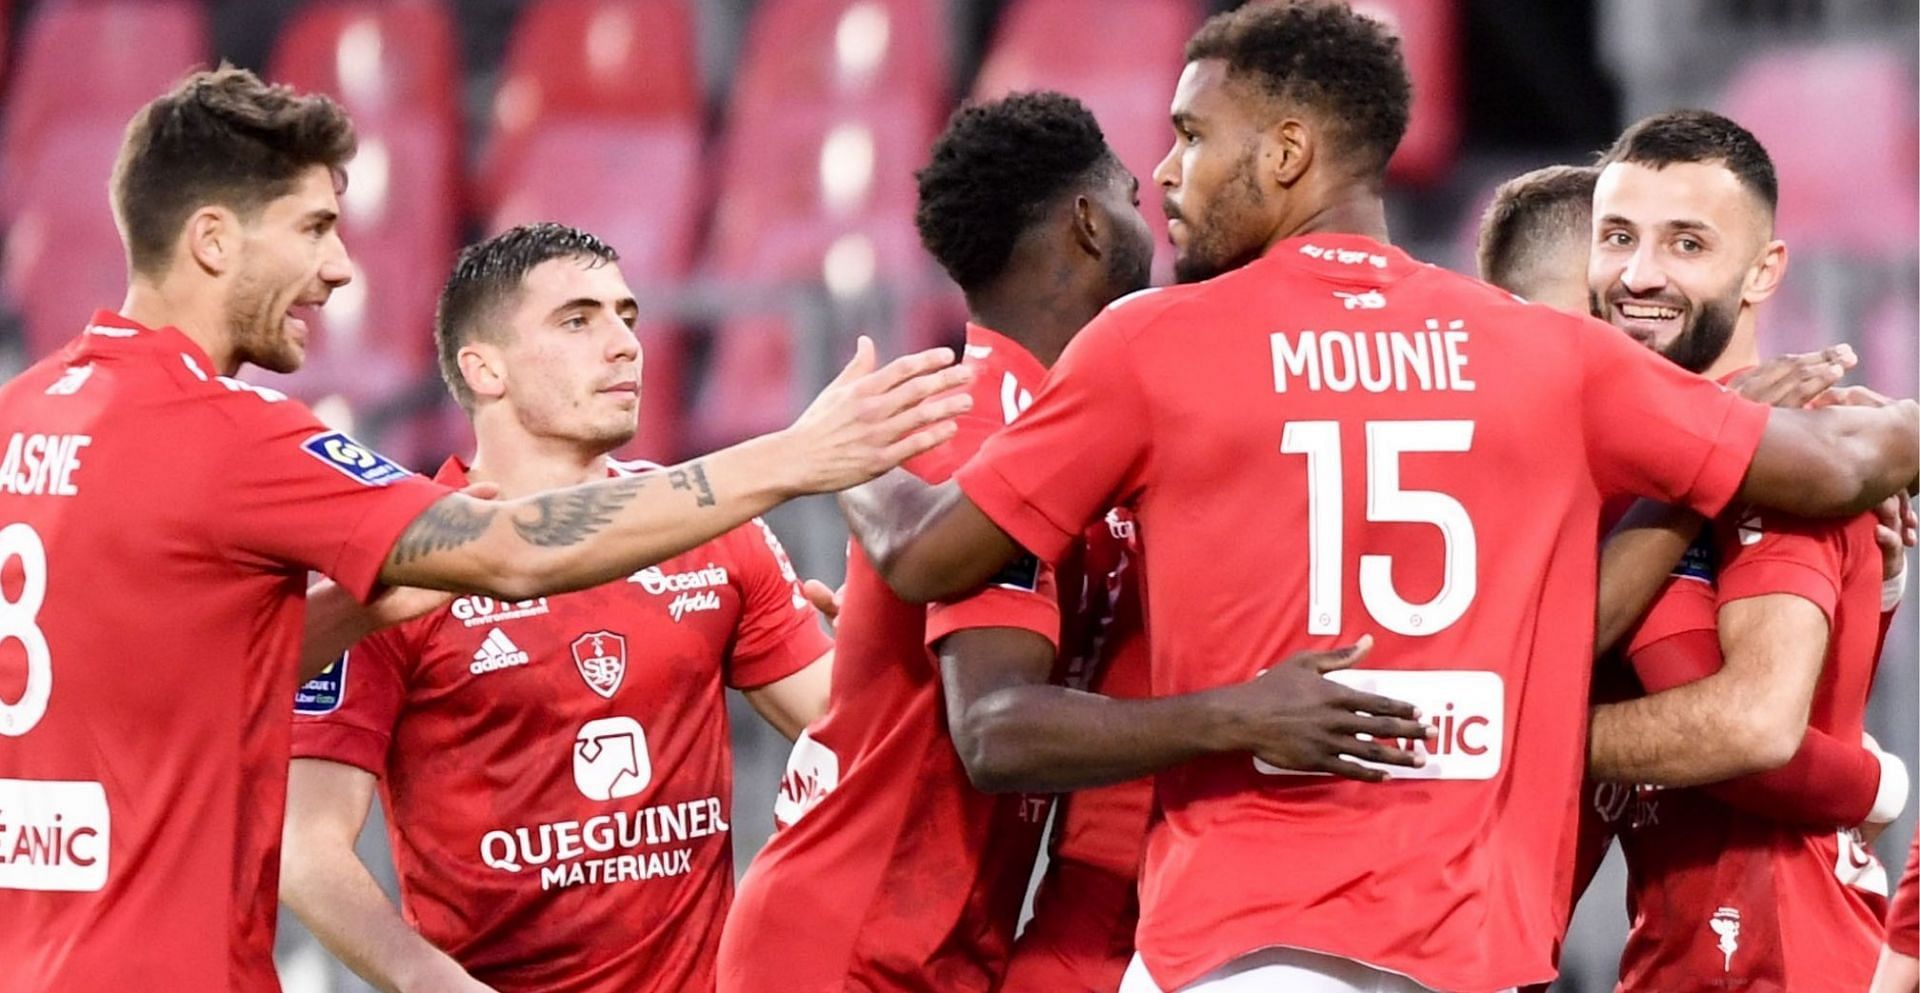 Brest have failed to win their last three games to Clermont